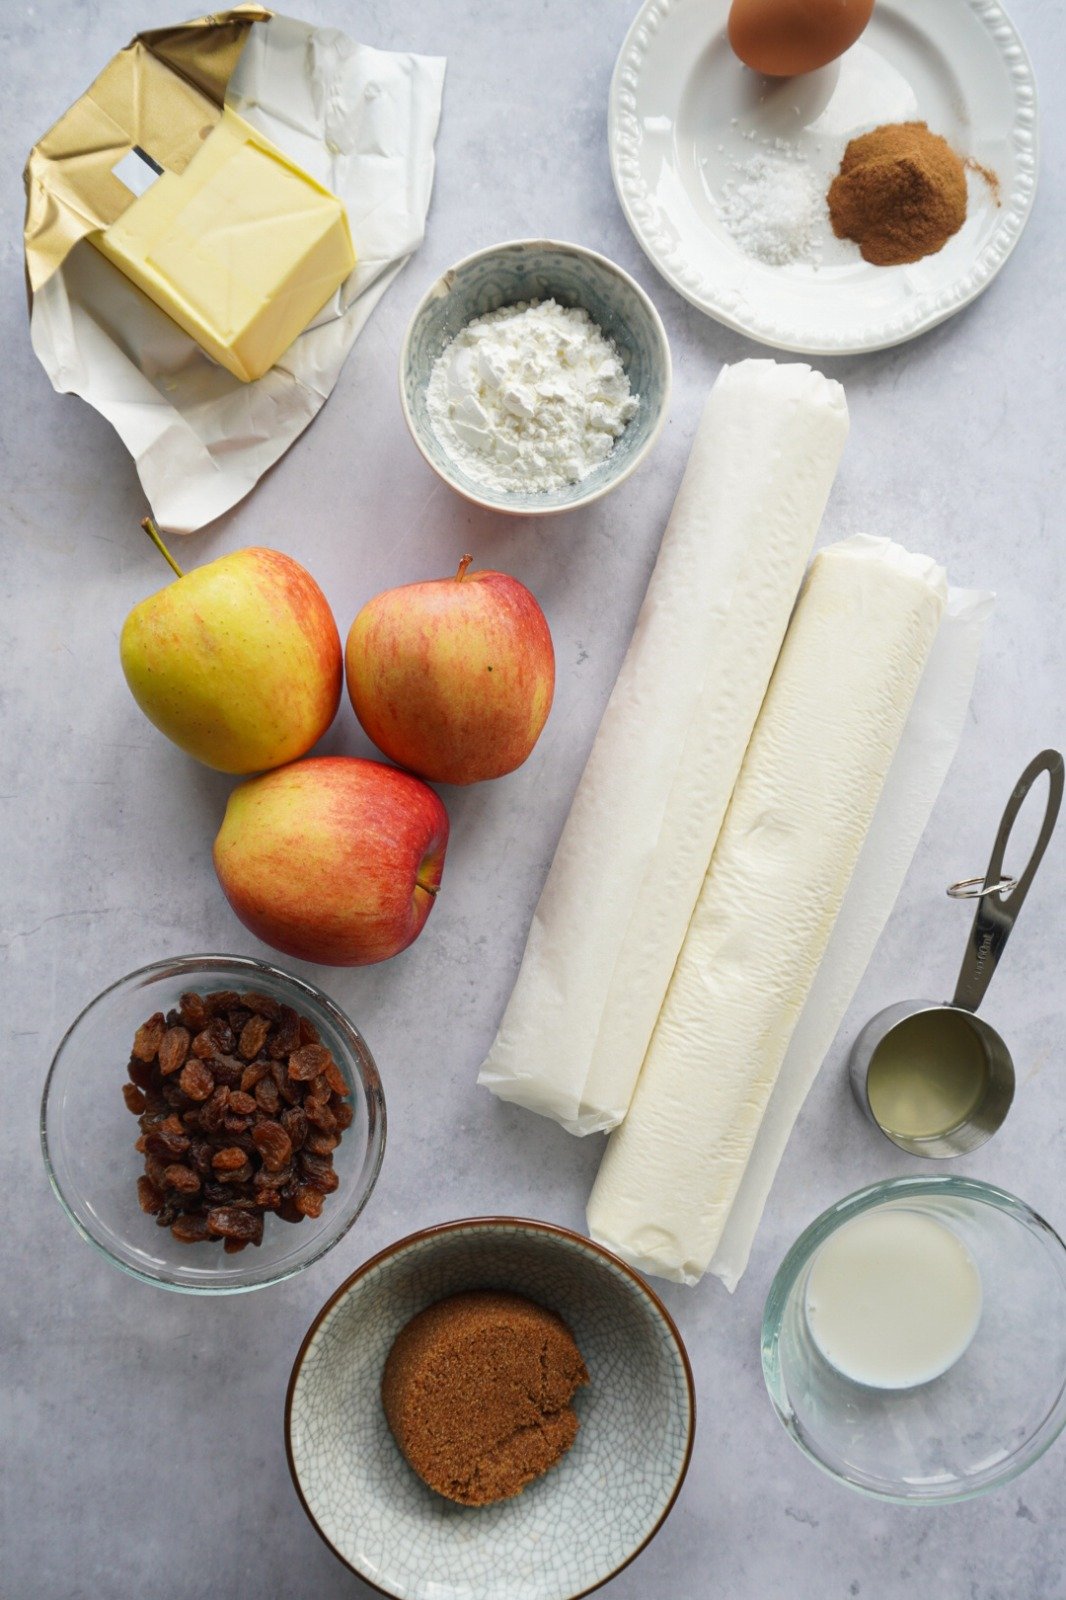 Ingredients for this Deliciously Tasty Apple Strudel Pie Recipe